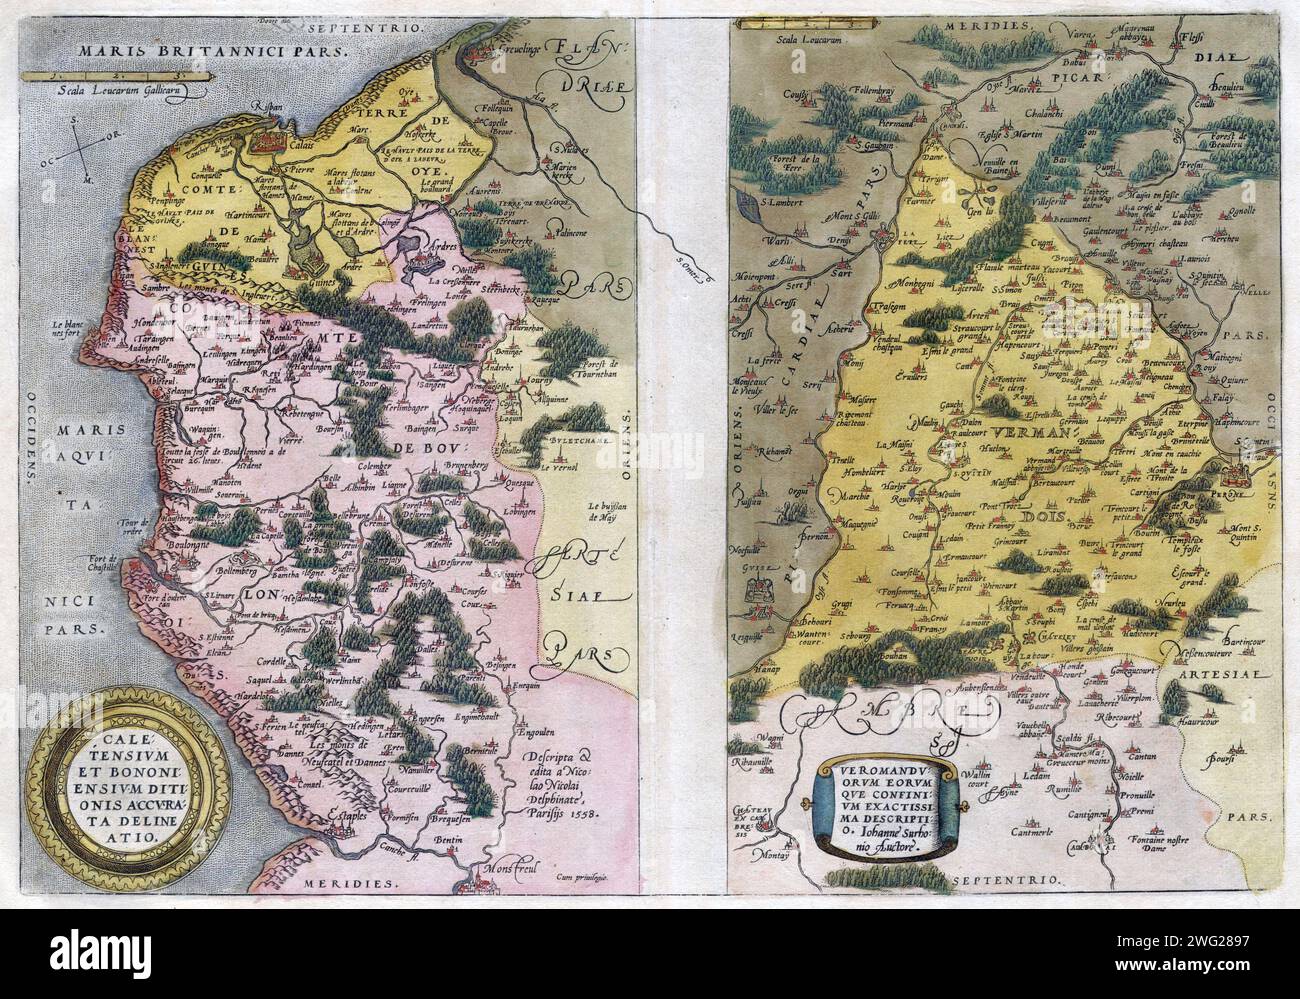 1579 Ortelius Map of Calais and Vermandois, France and Vicinity.  Left map, entitled Caletensium,depicts the French and Belgian coastline from Estables to Calais. The right map, entitled Veromandorum, depicts the immediate vicinity of Saint-Quentin in northern France. This map is based upon the cartographic work of Jean de Surhon who was commissioned by the crown to map the region in 1557. Each map features a decorative title cartouche in the lower left quadrant. Stock Photo